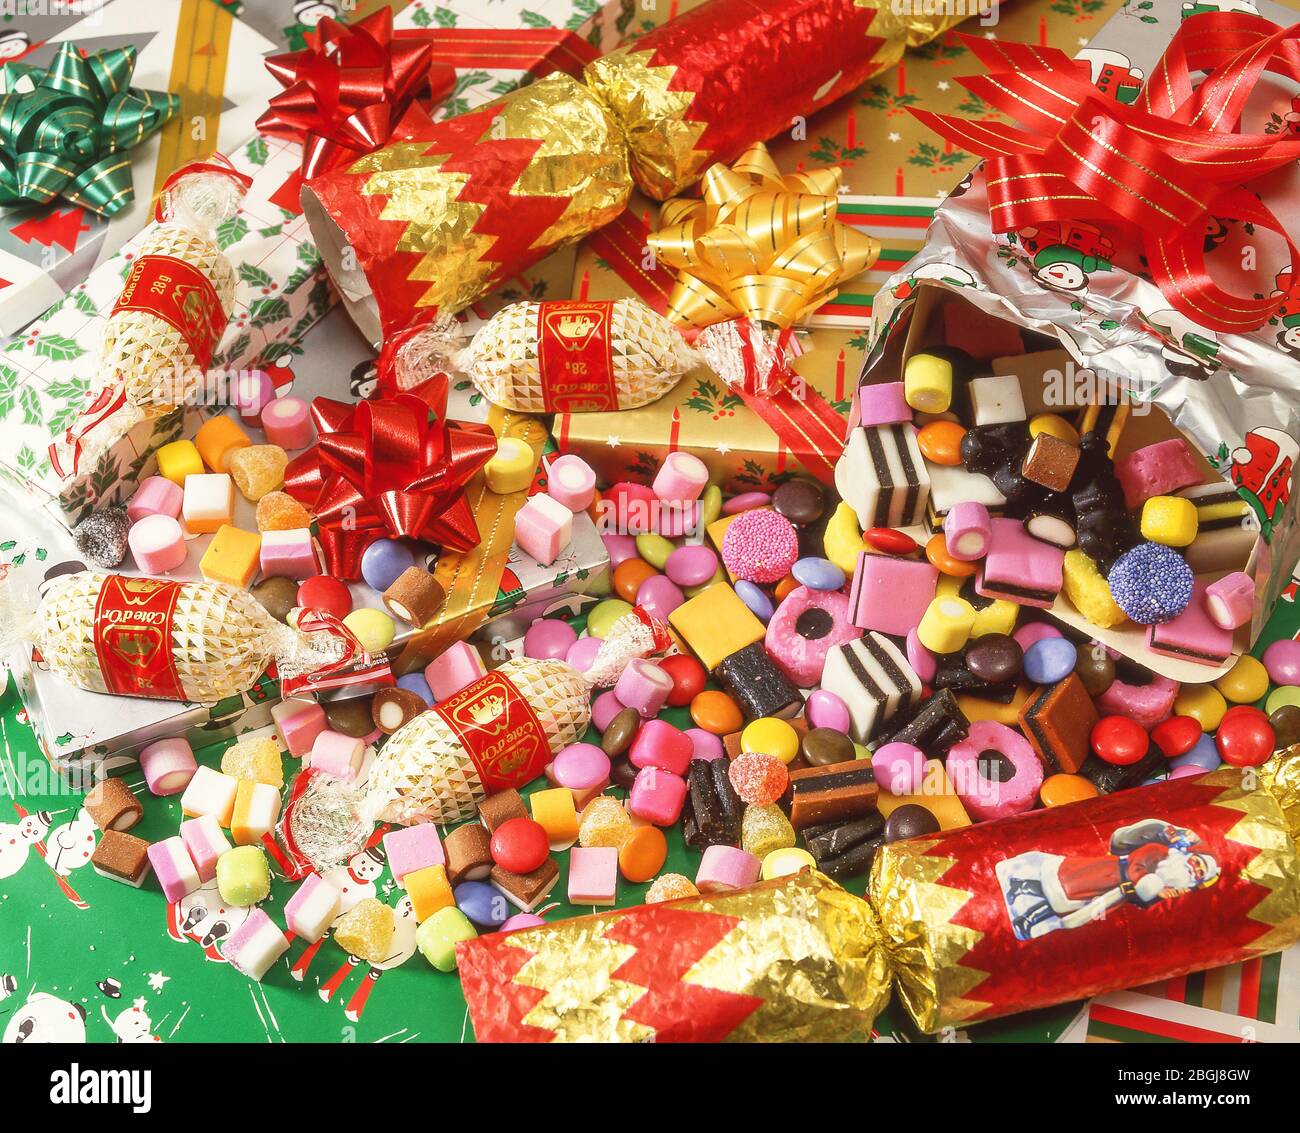 Christmas crackers and confectionery, Ascot, Berkshire, United Kingdom Stock Photo